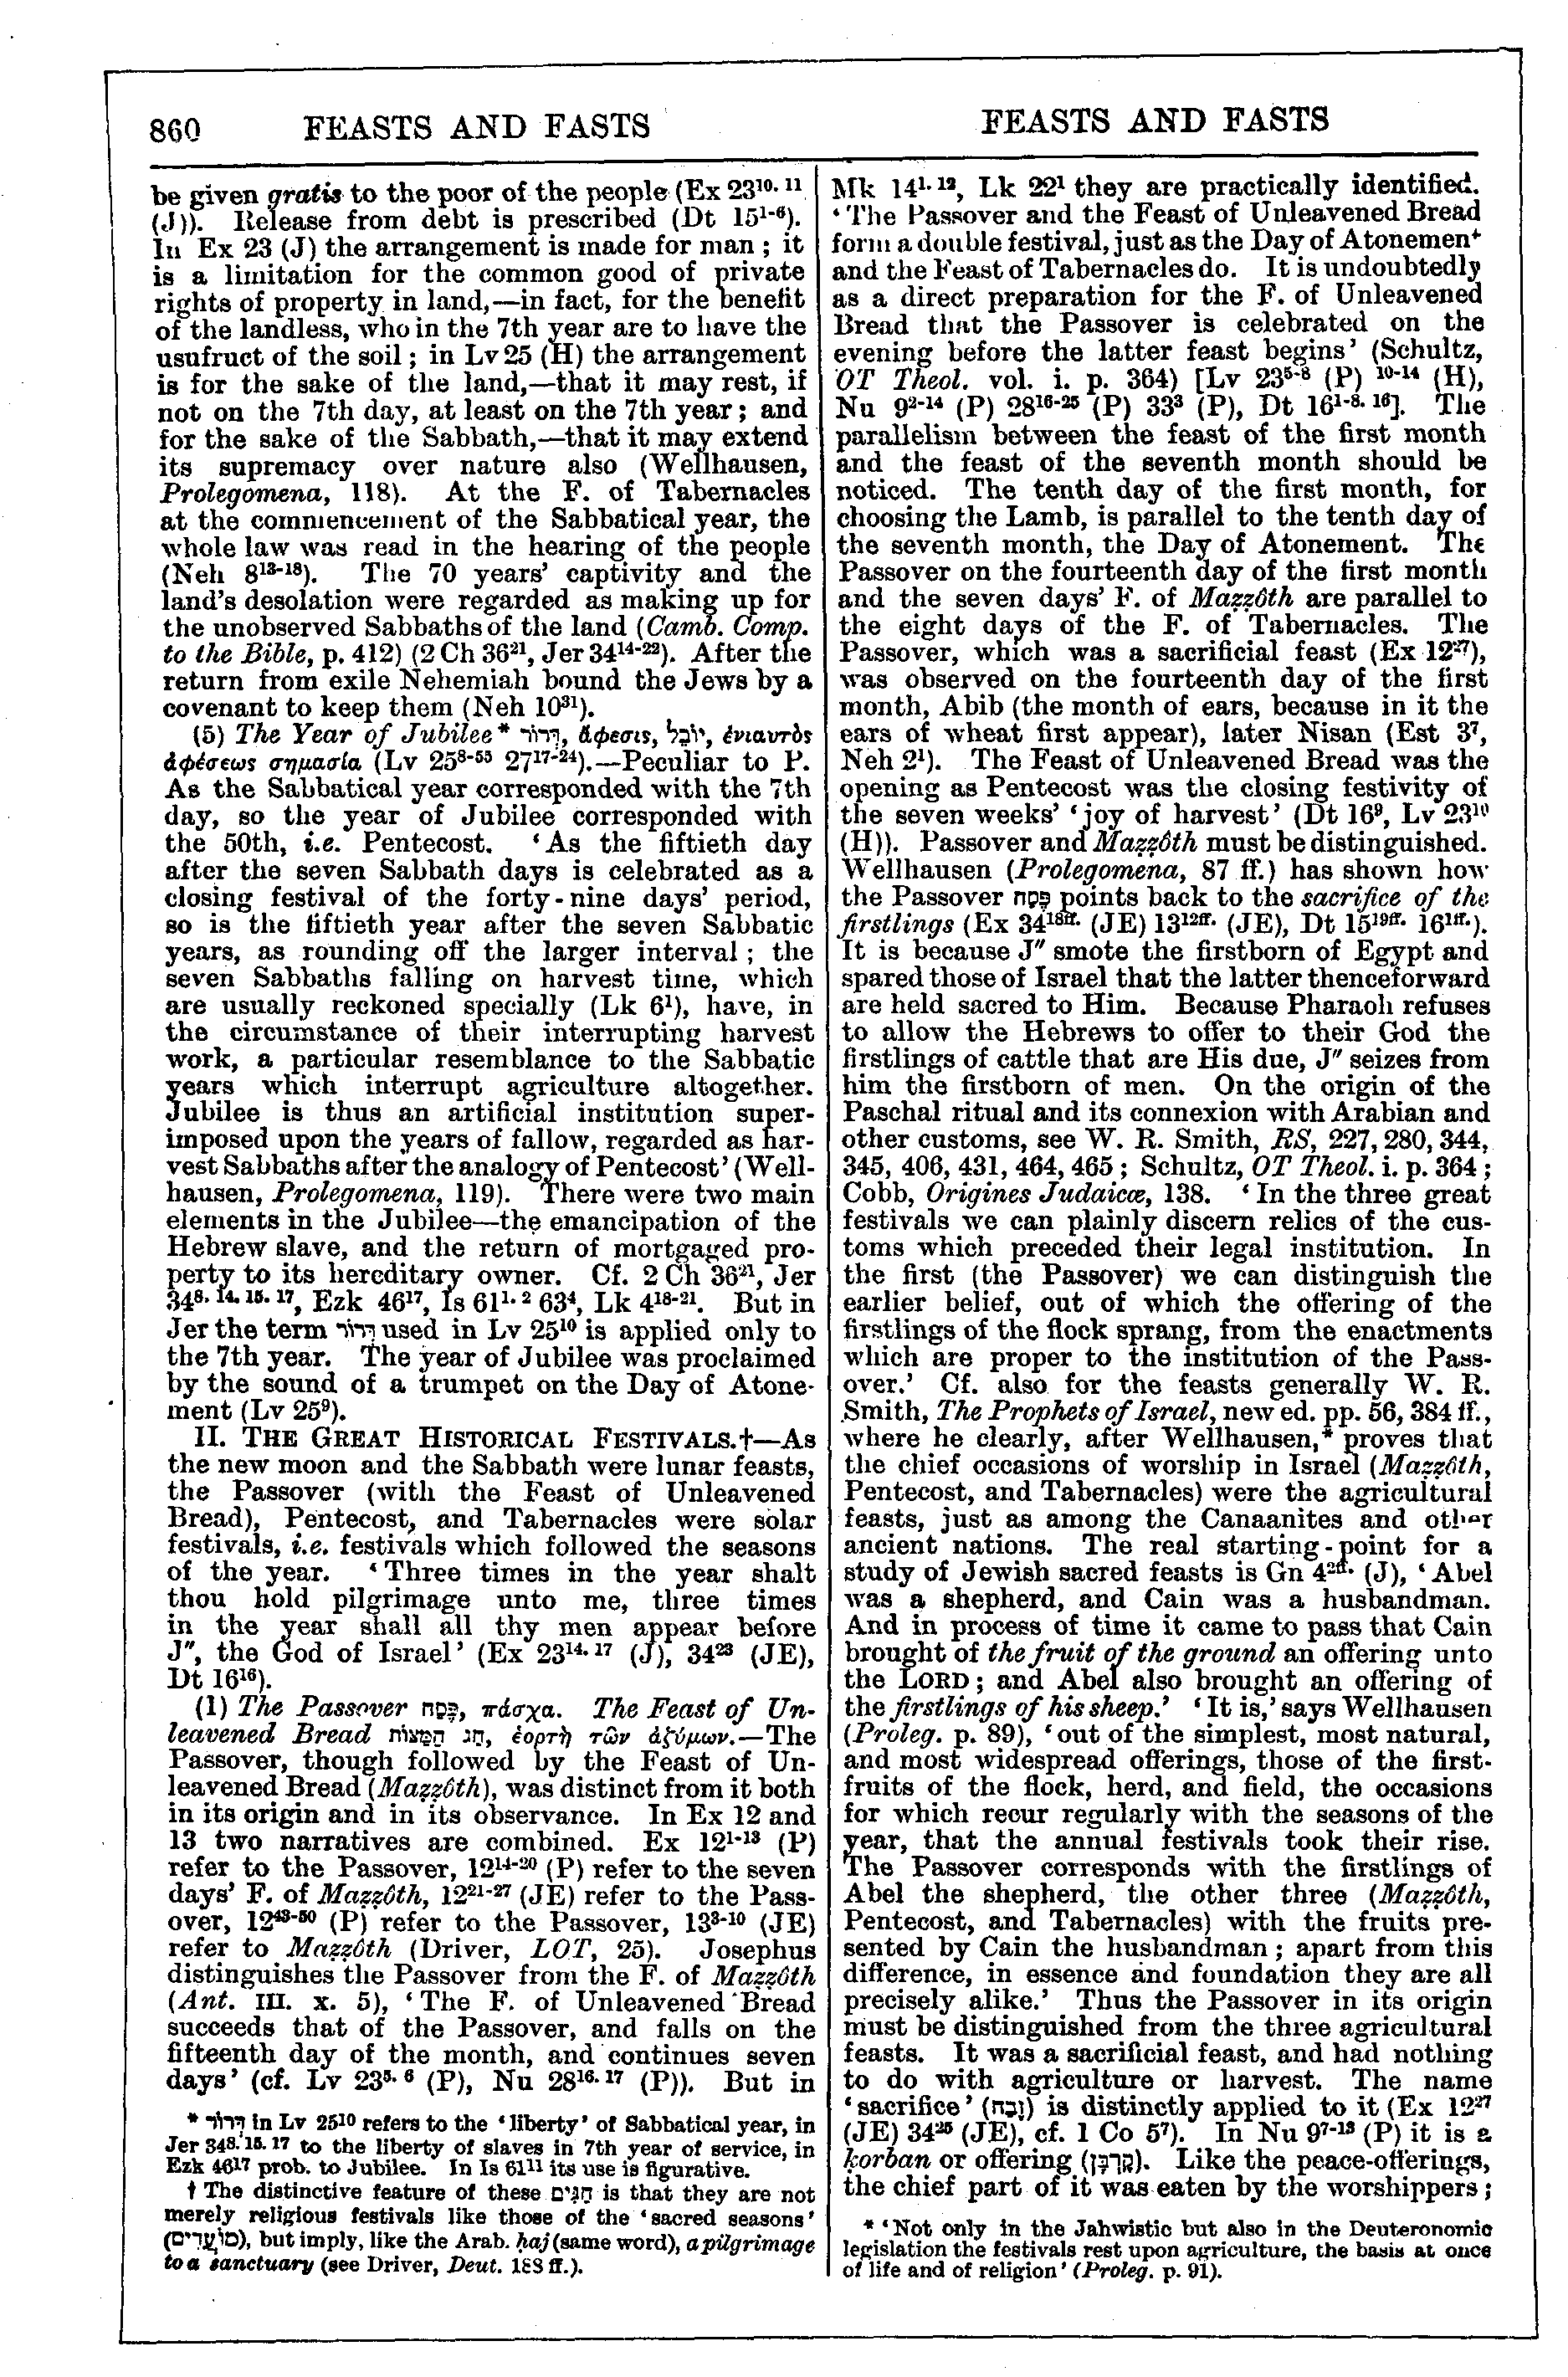 Image of page 860